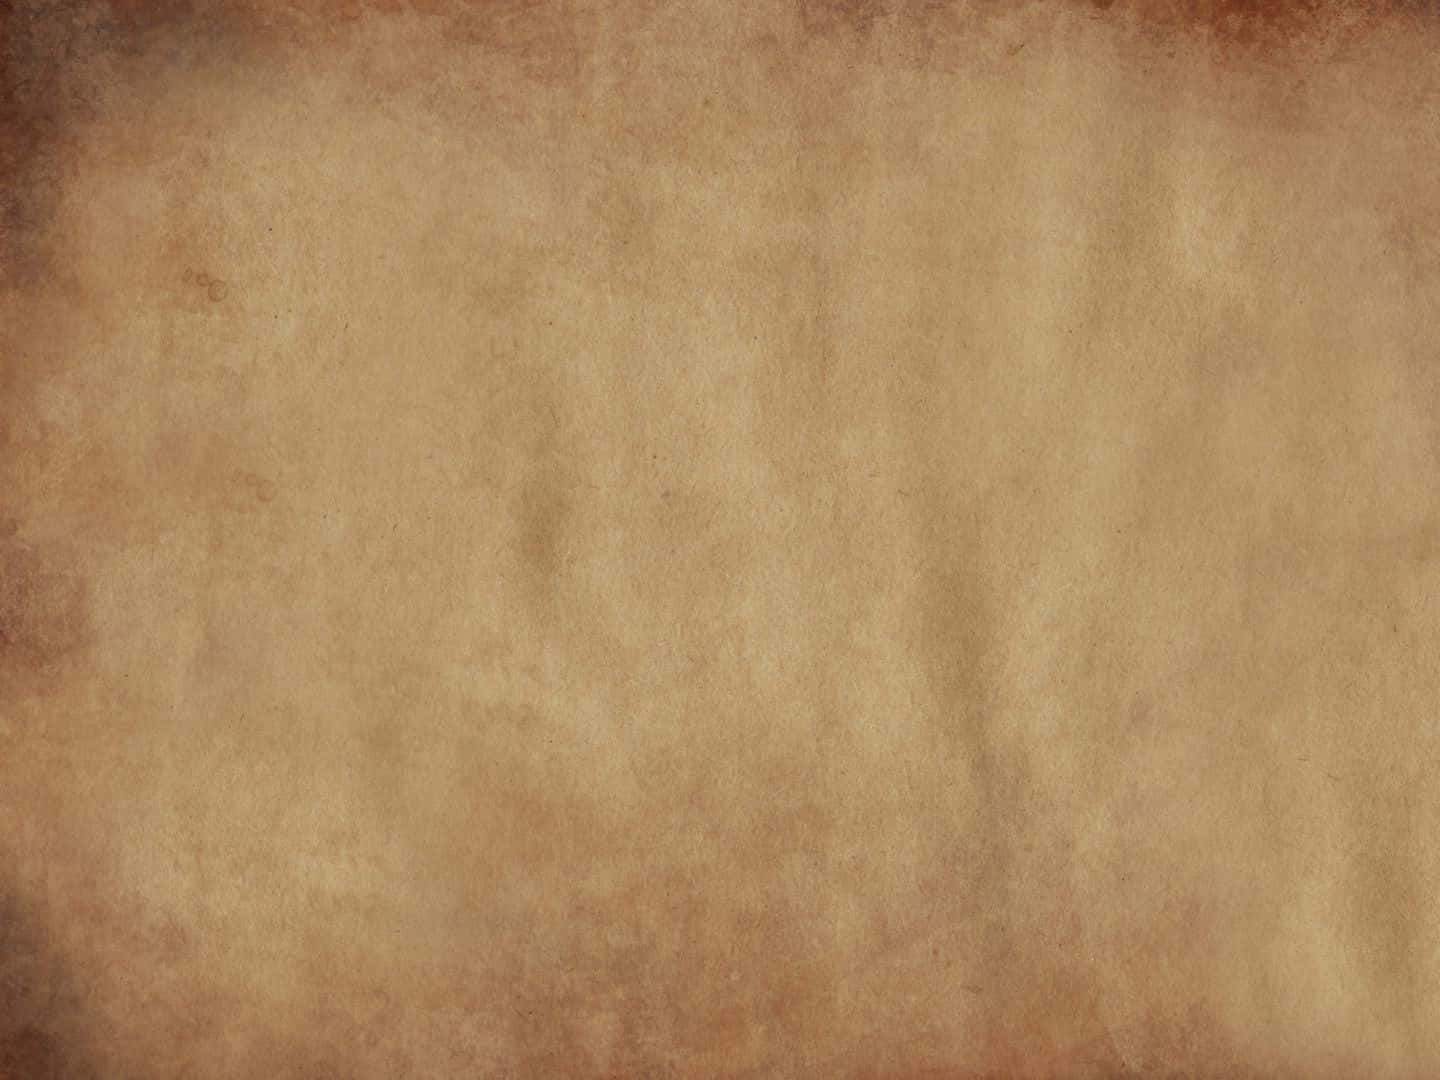 Parchment Background In Discolored Brown Color